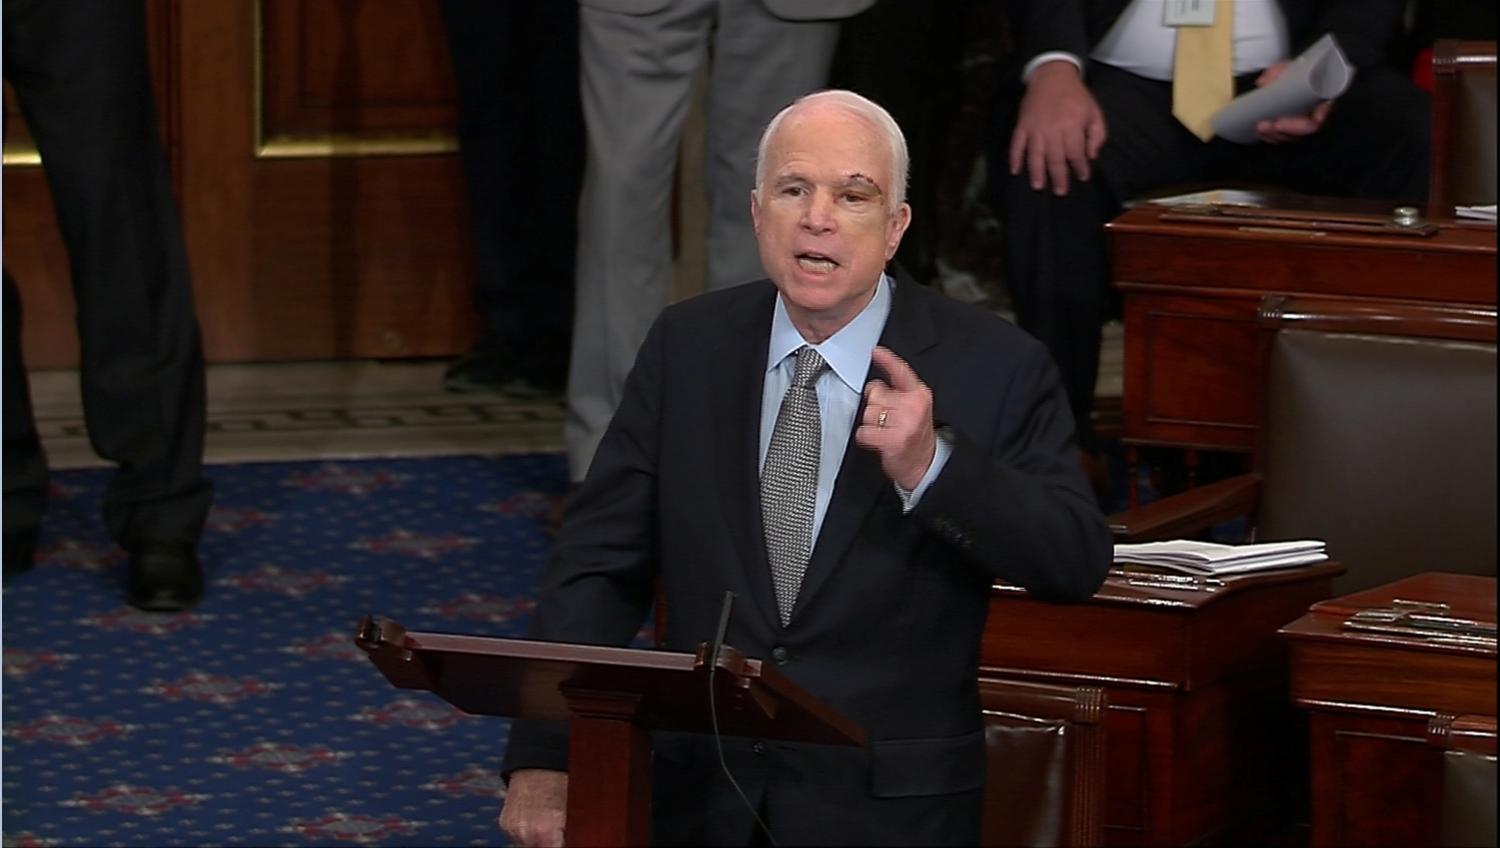 A still image from video shows U.S. Senator John McCain (R-AZ), who had been recuperating in Arizona after being diagnosed with brain cancer, speaking on the floor of the U.S. Senate after returning to Washington for a vote on healthcare reform in Washington, U.S., July 25, 2017. SENATE TV/Handout via REUTERS - RTX3CVPP